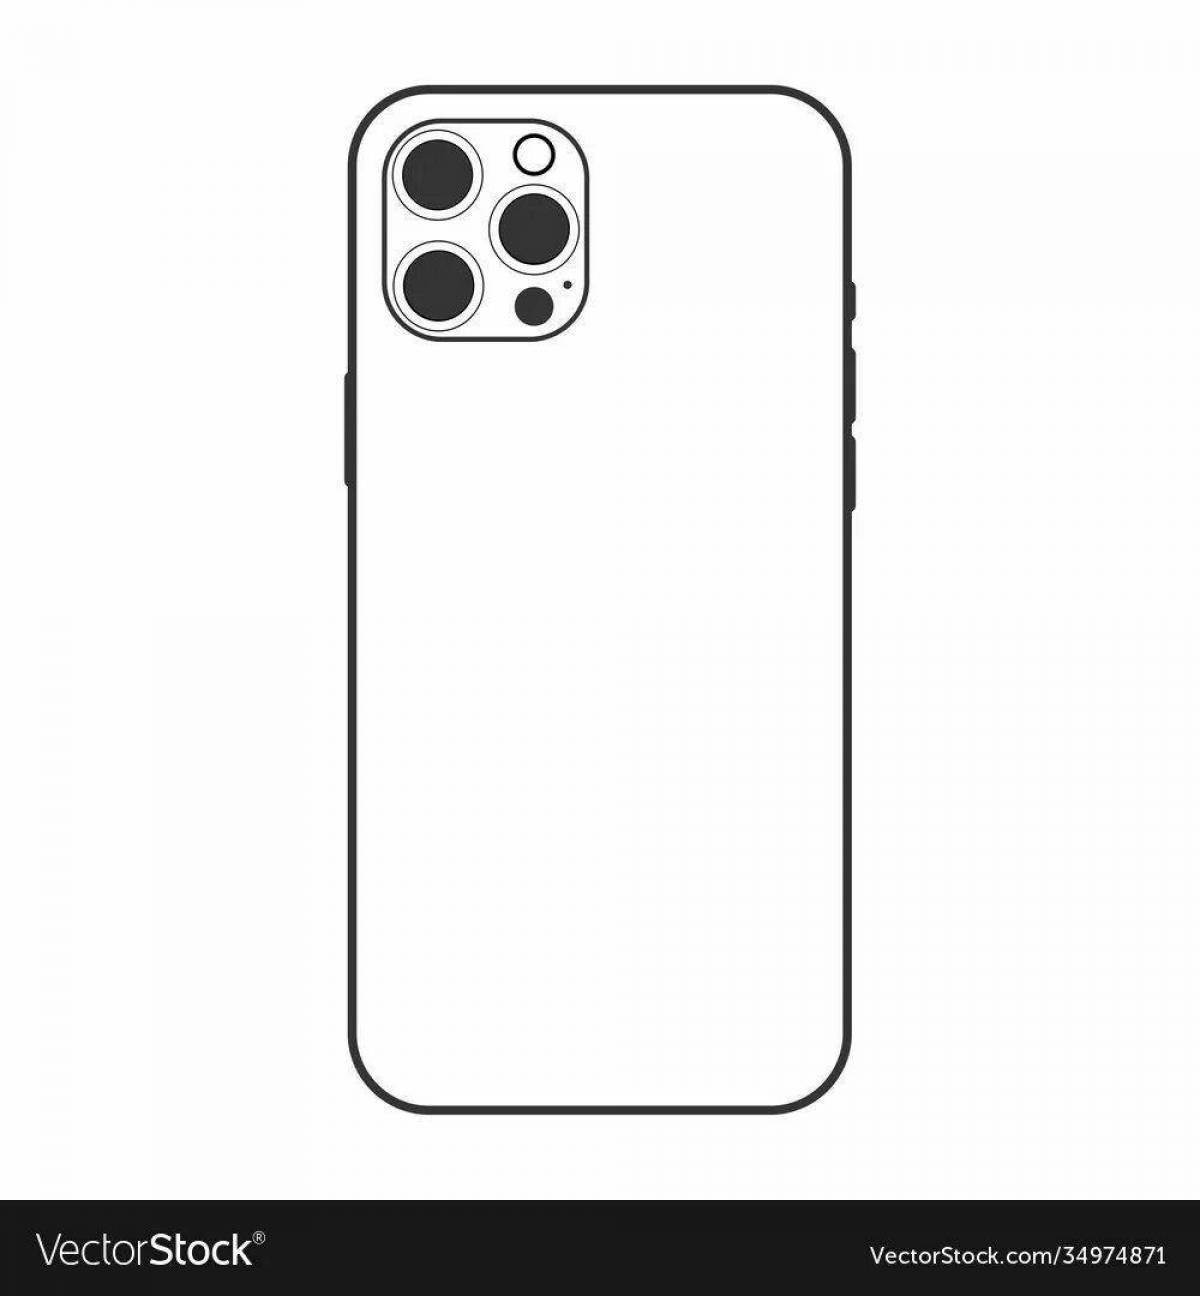 Charming iphone 7 coloring book